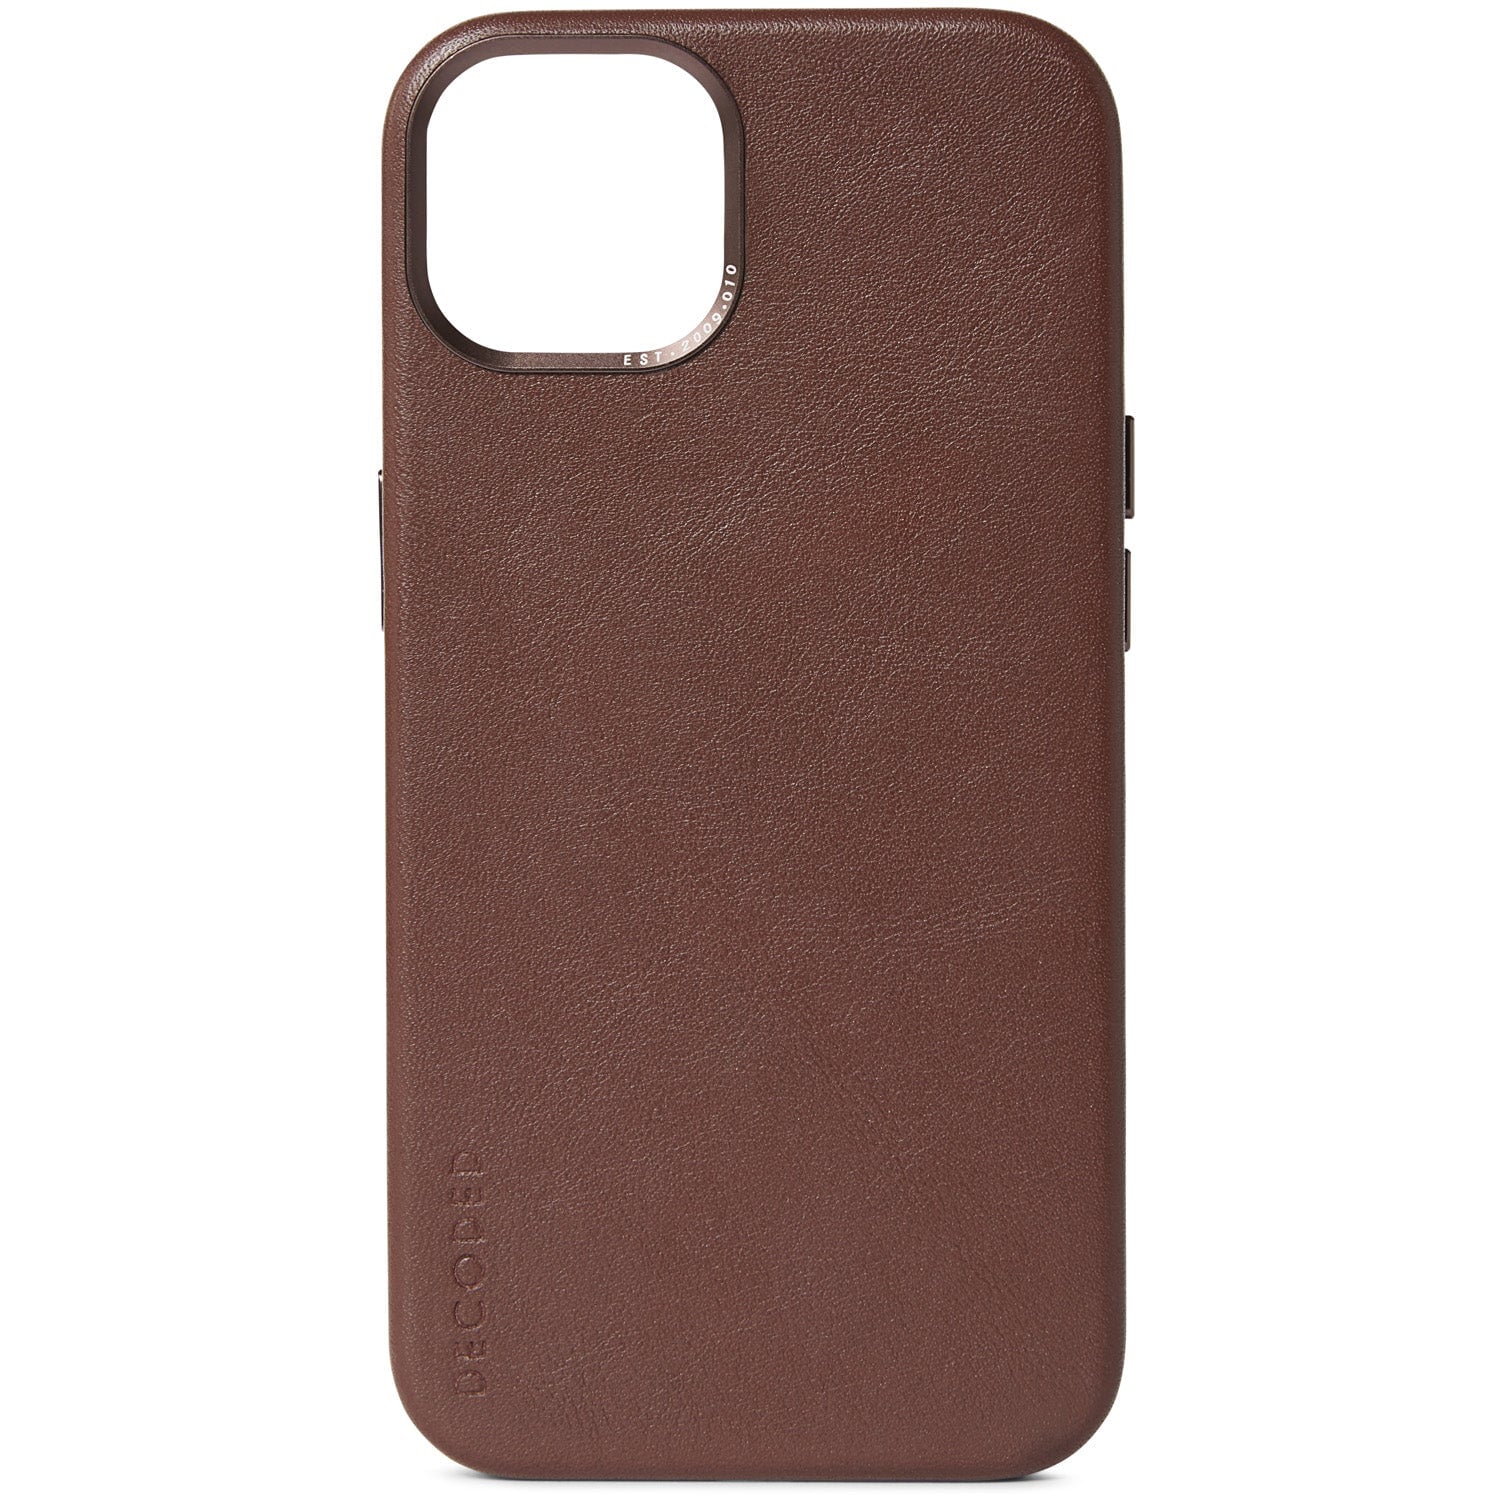 Leather Back Cover  Chocolate Brown – Decoded Bags